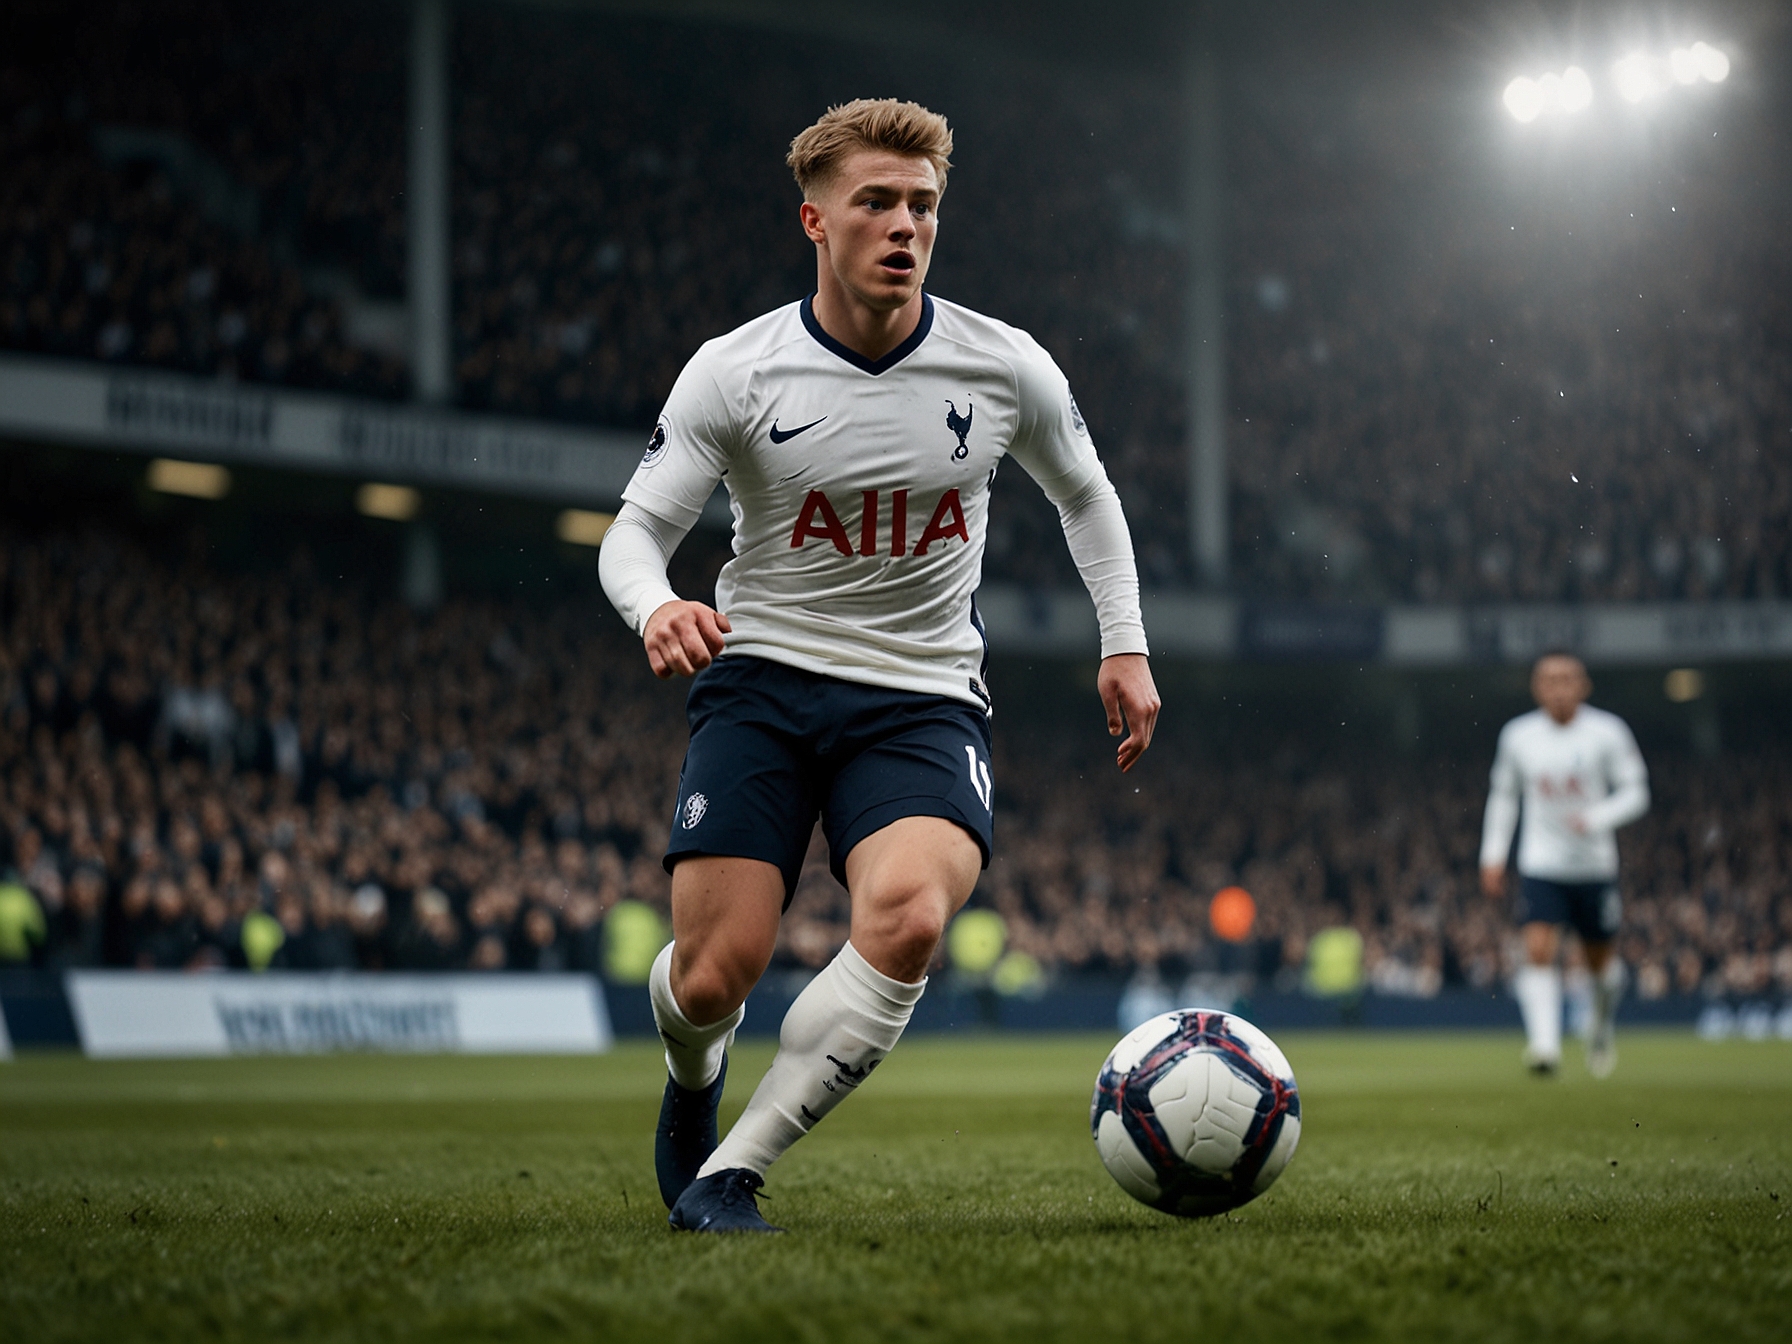 A dynamic action shot of Archie Gray showcasing his impressive technical skills and vision on the field, representing his potential to transform Tottenham's midfield setup.